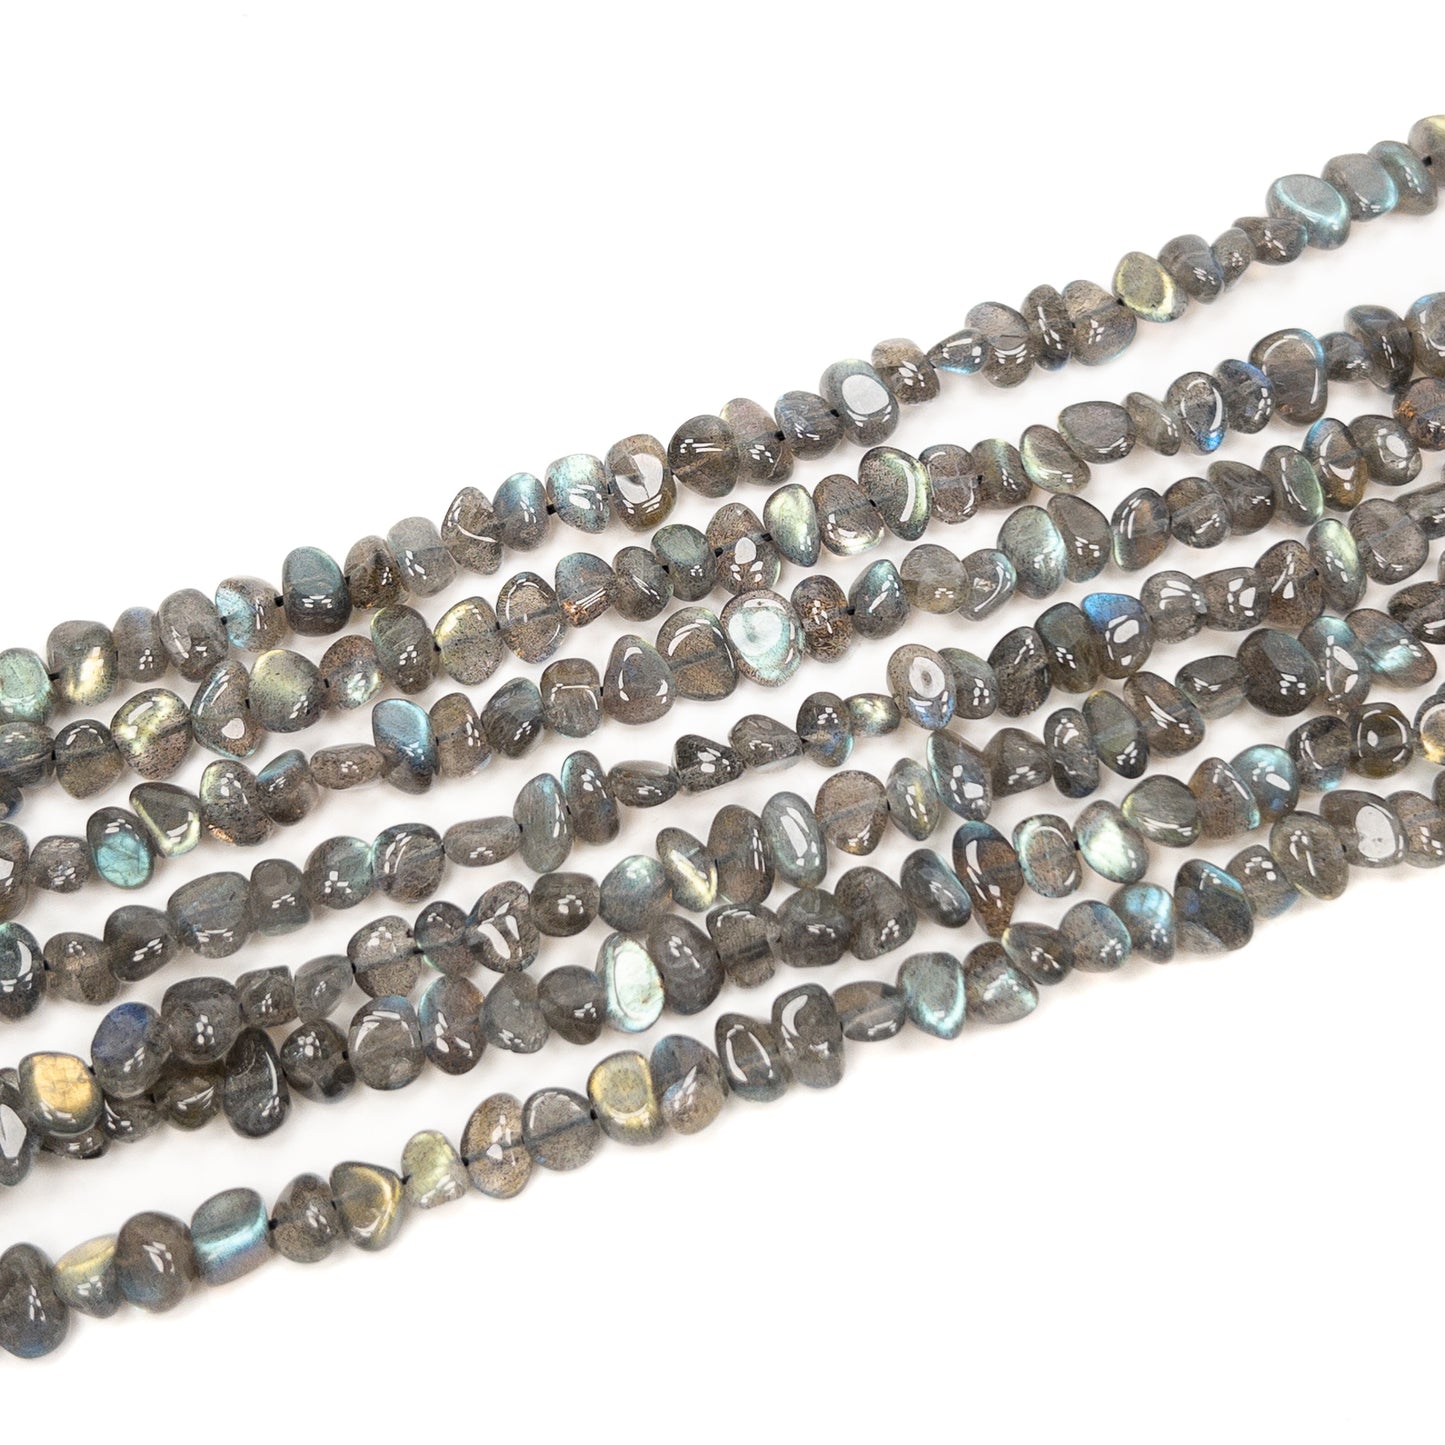 Labradorite Small Chubby Chip Bead (2 Quantities Available)